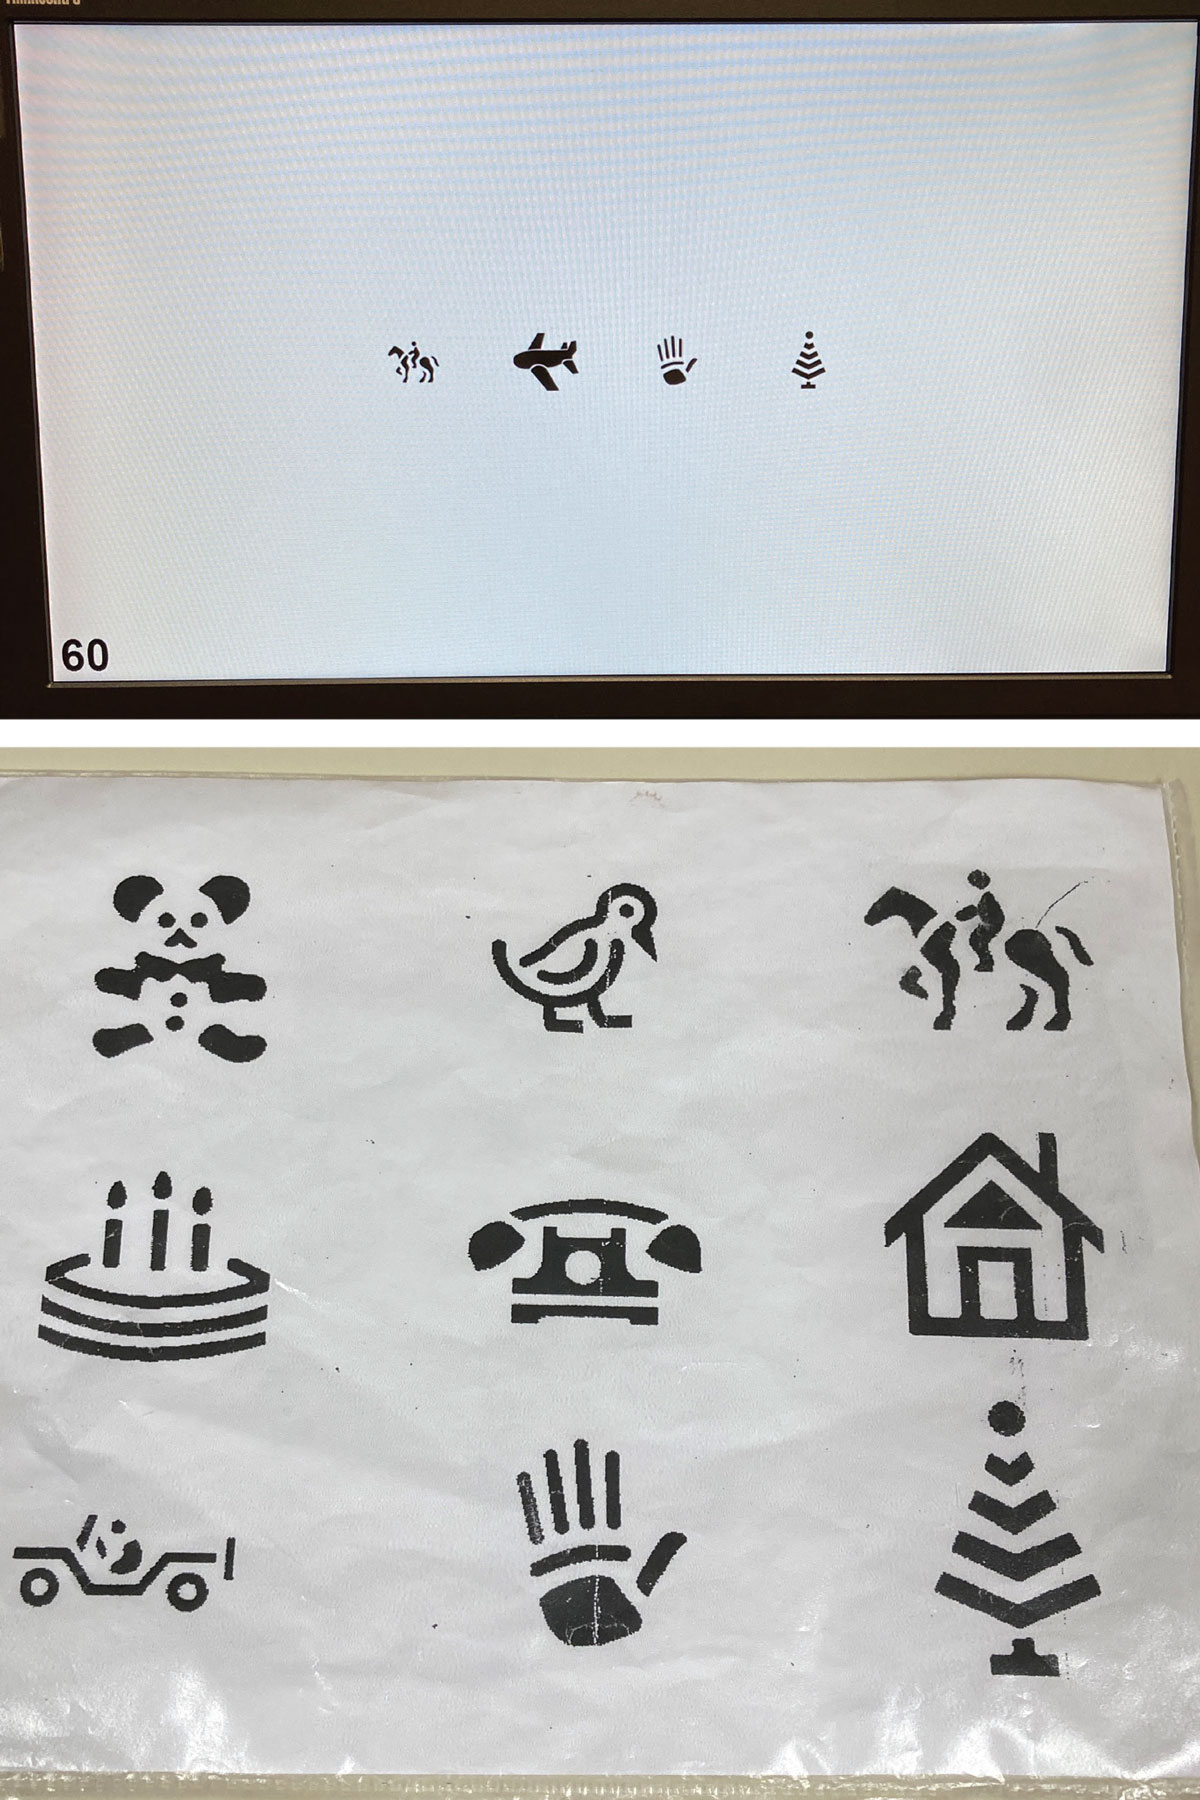 Picture acuity charts can be very useful when working with younger children.